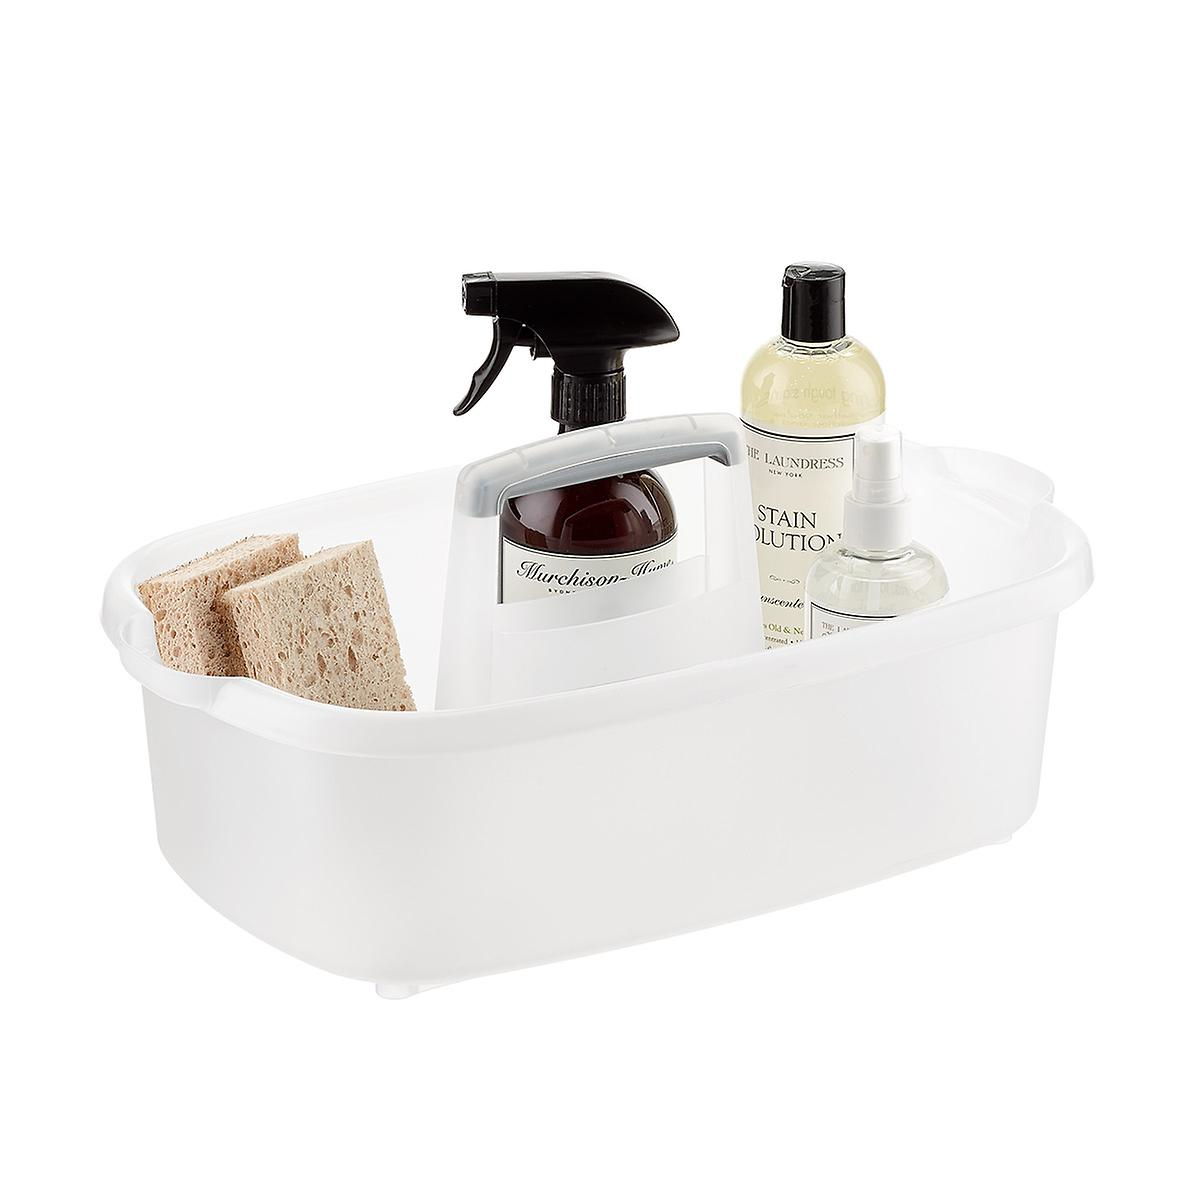 Rectangular Cleaning Caddy with Handle